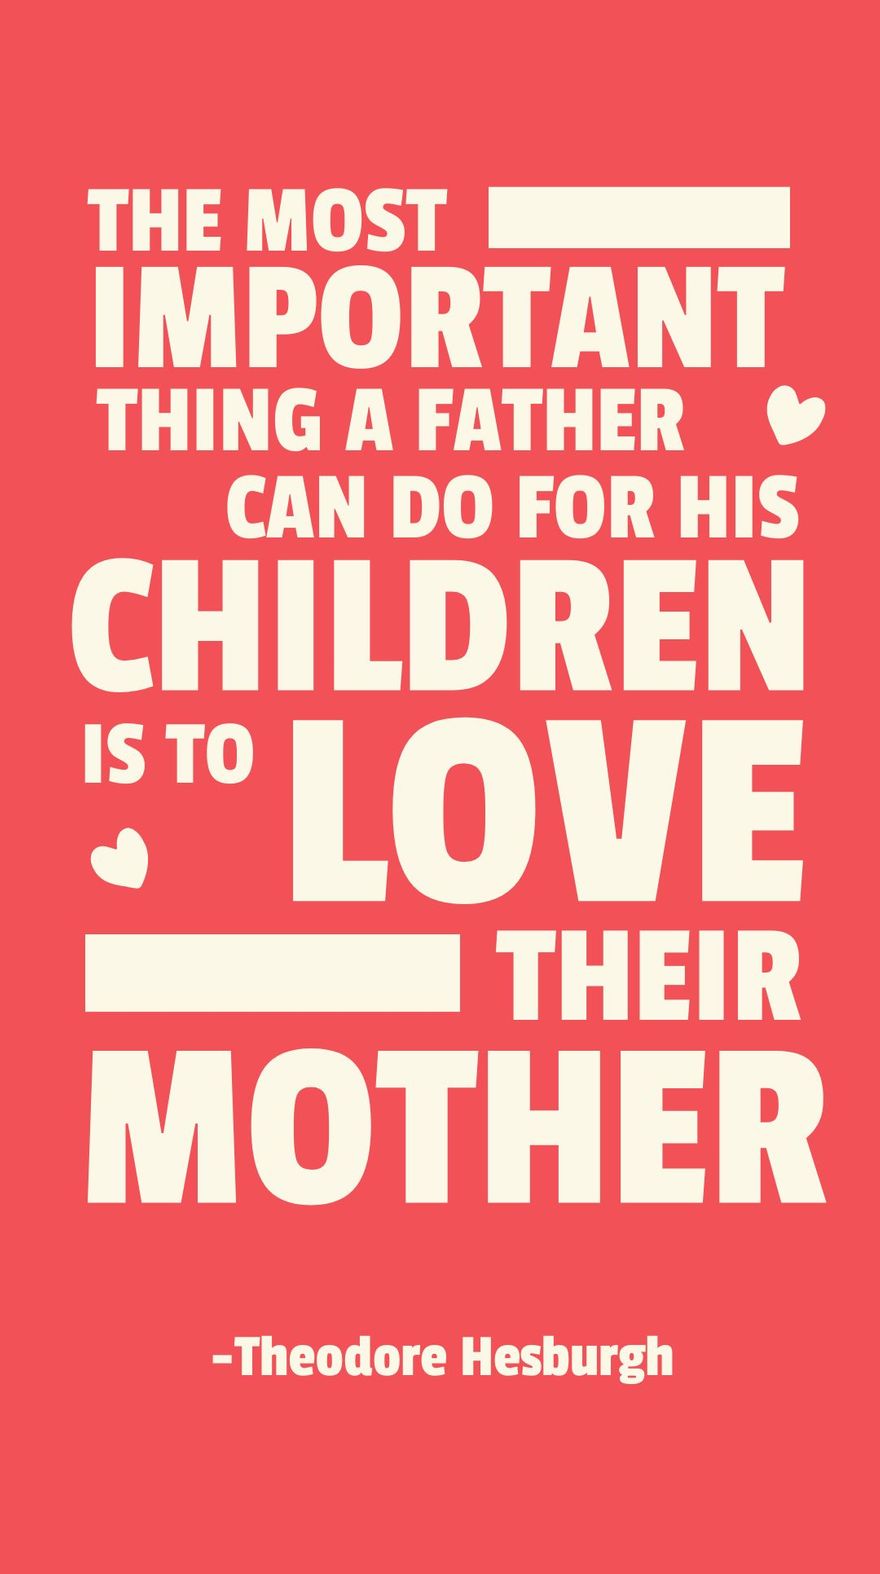 Free Theodore Hesburgh - The most important thing a father can do for his children is to love their mother.  in JPG